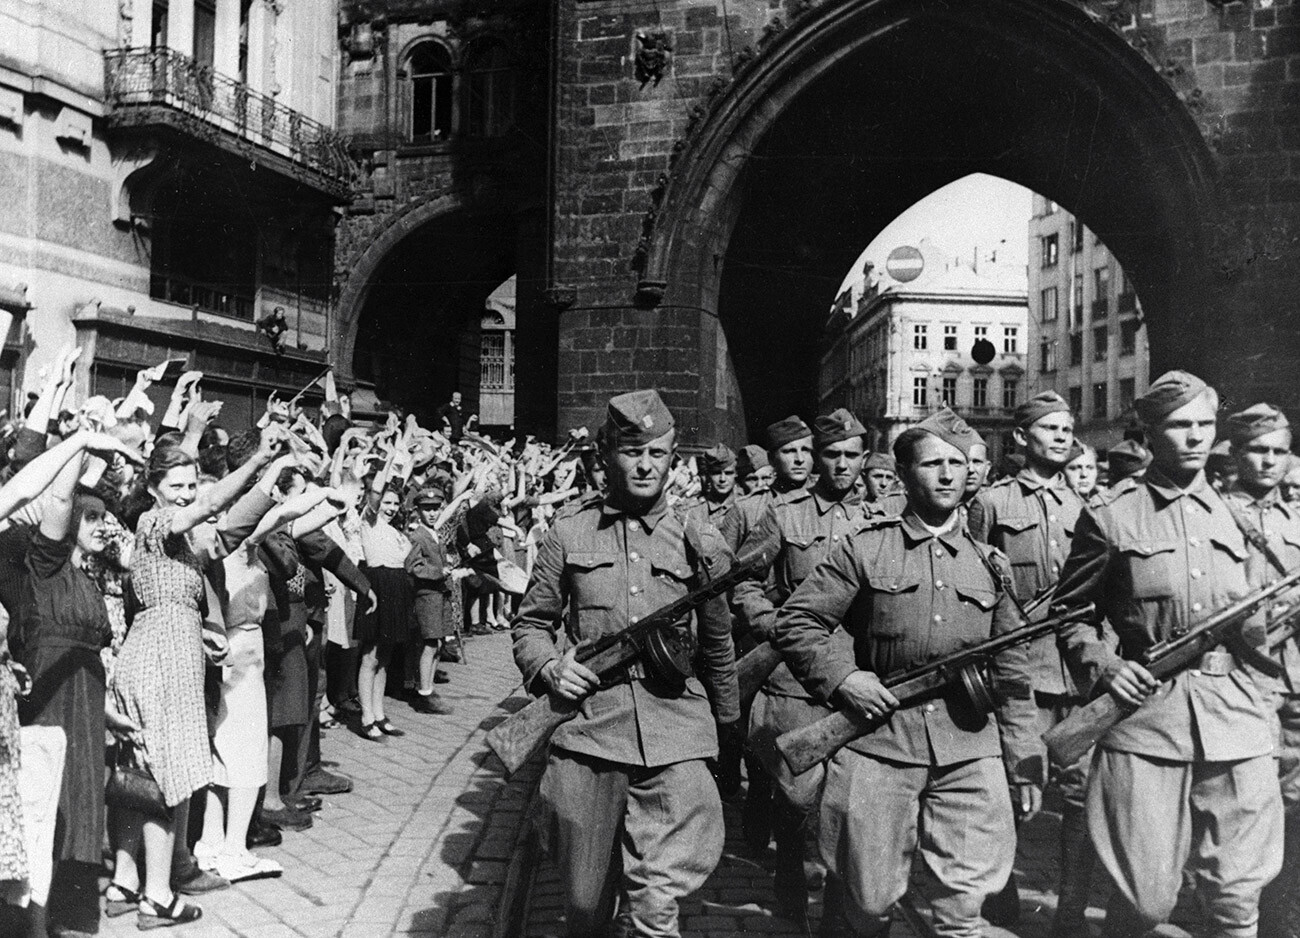 Prague townsfolk welcome the Czechoslovak corps soldiers who together with the Red Army liberated the country from the Nazi occupation.